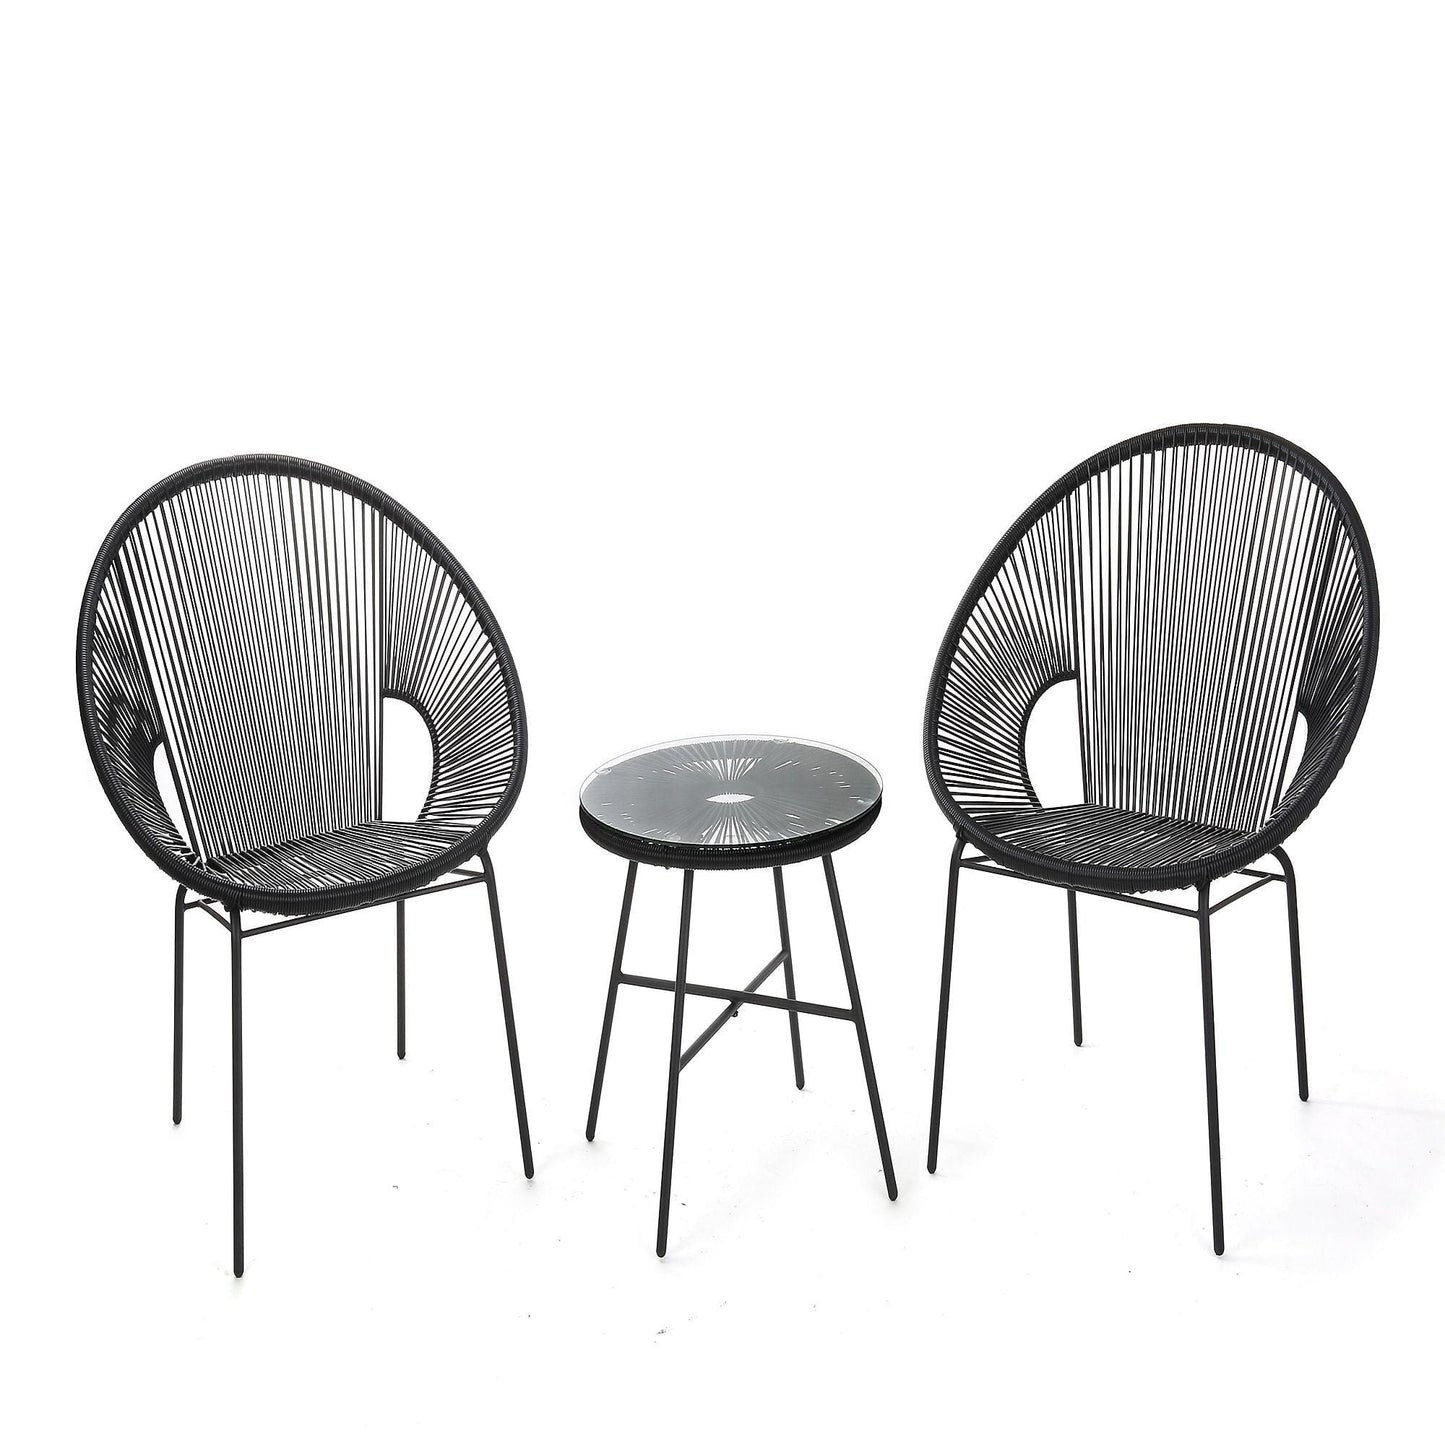 Dreamline Outdoor Furniture Garden Patio Seating Set (1+2) - 2 Chairs And Table Set